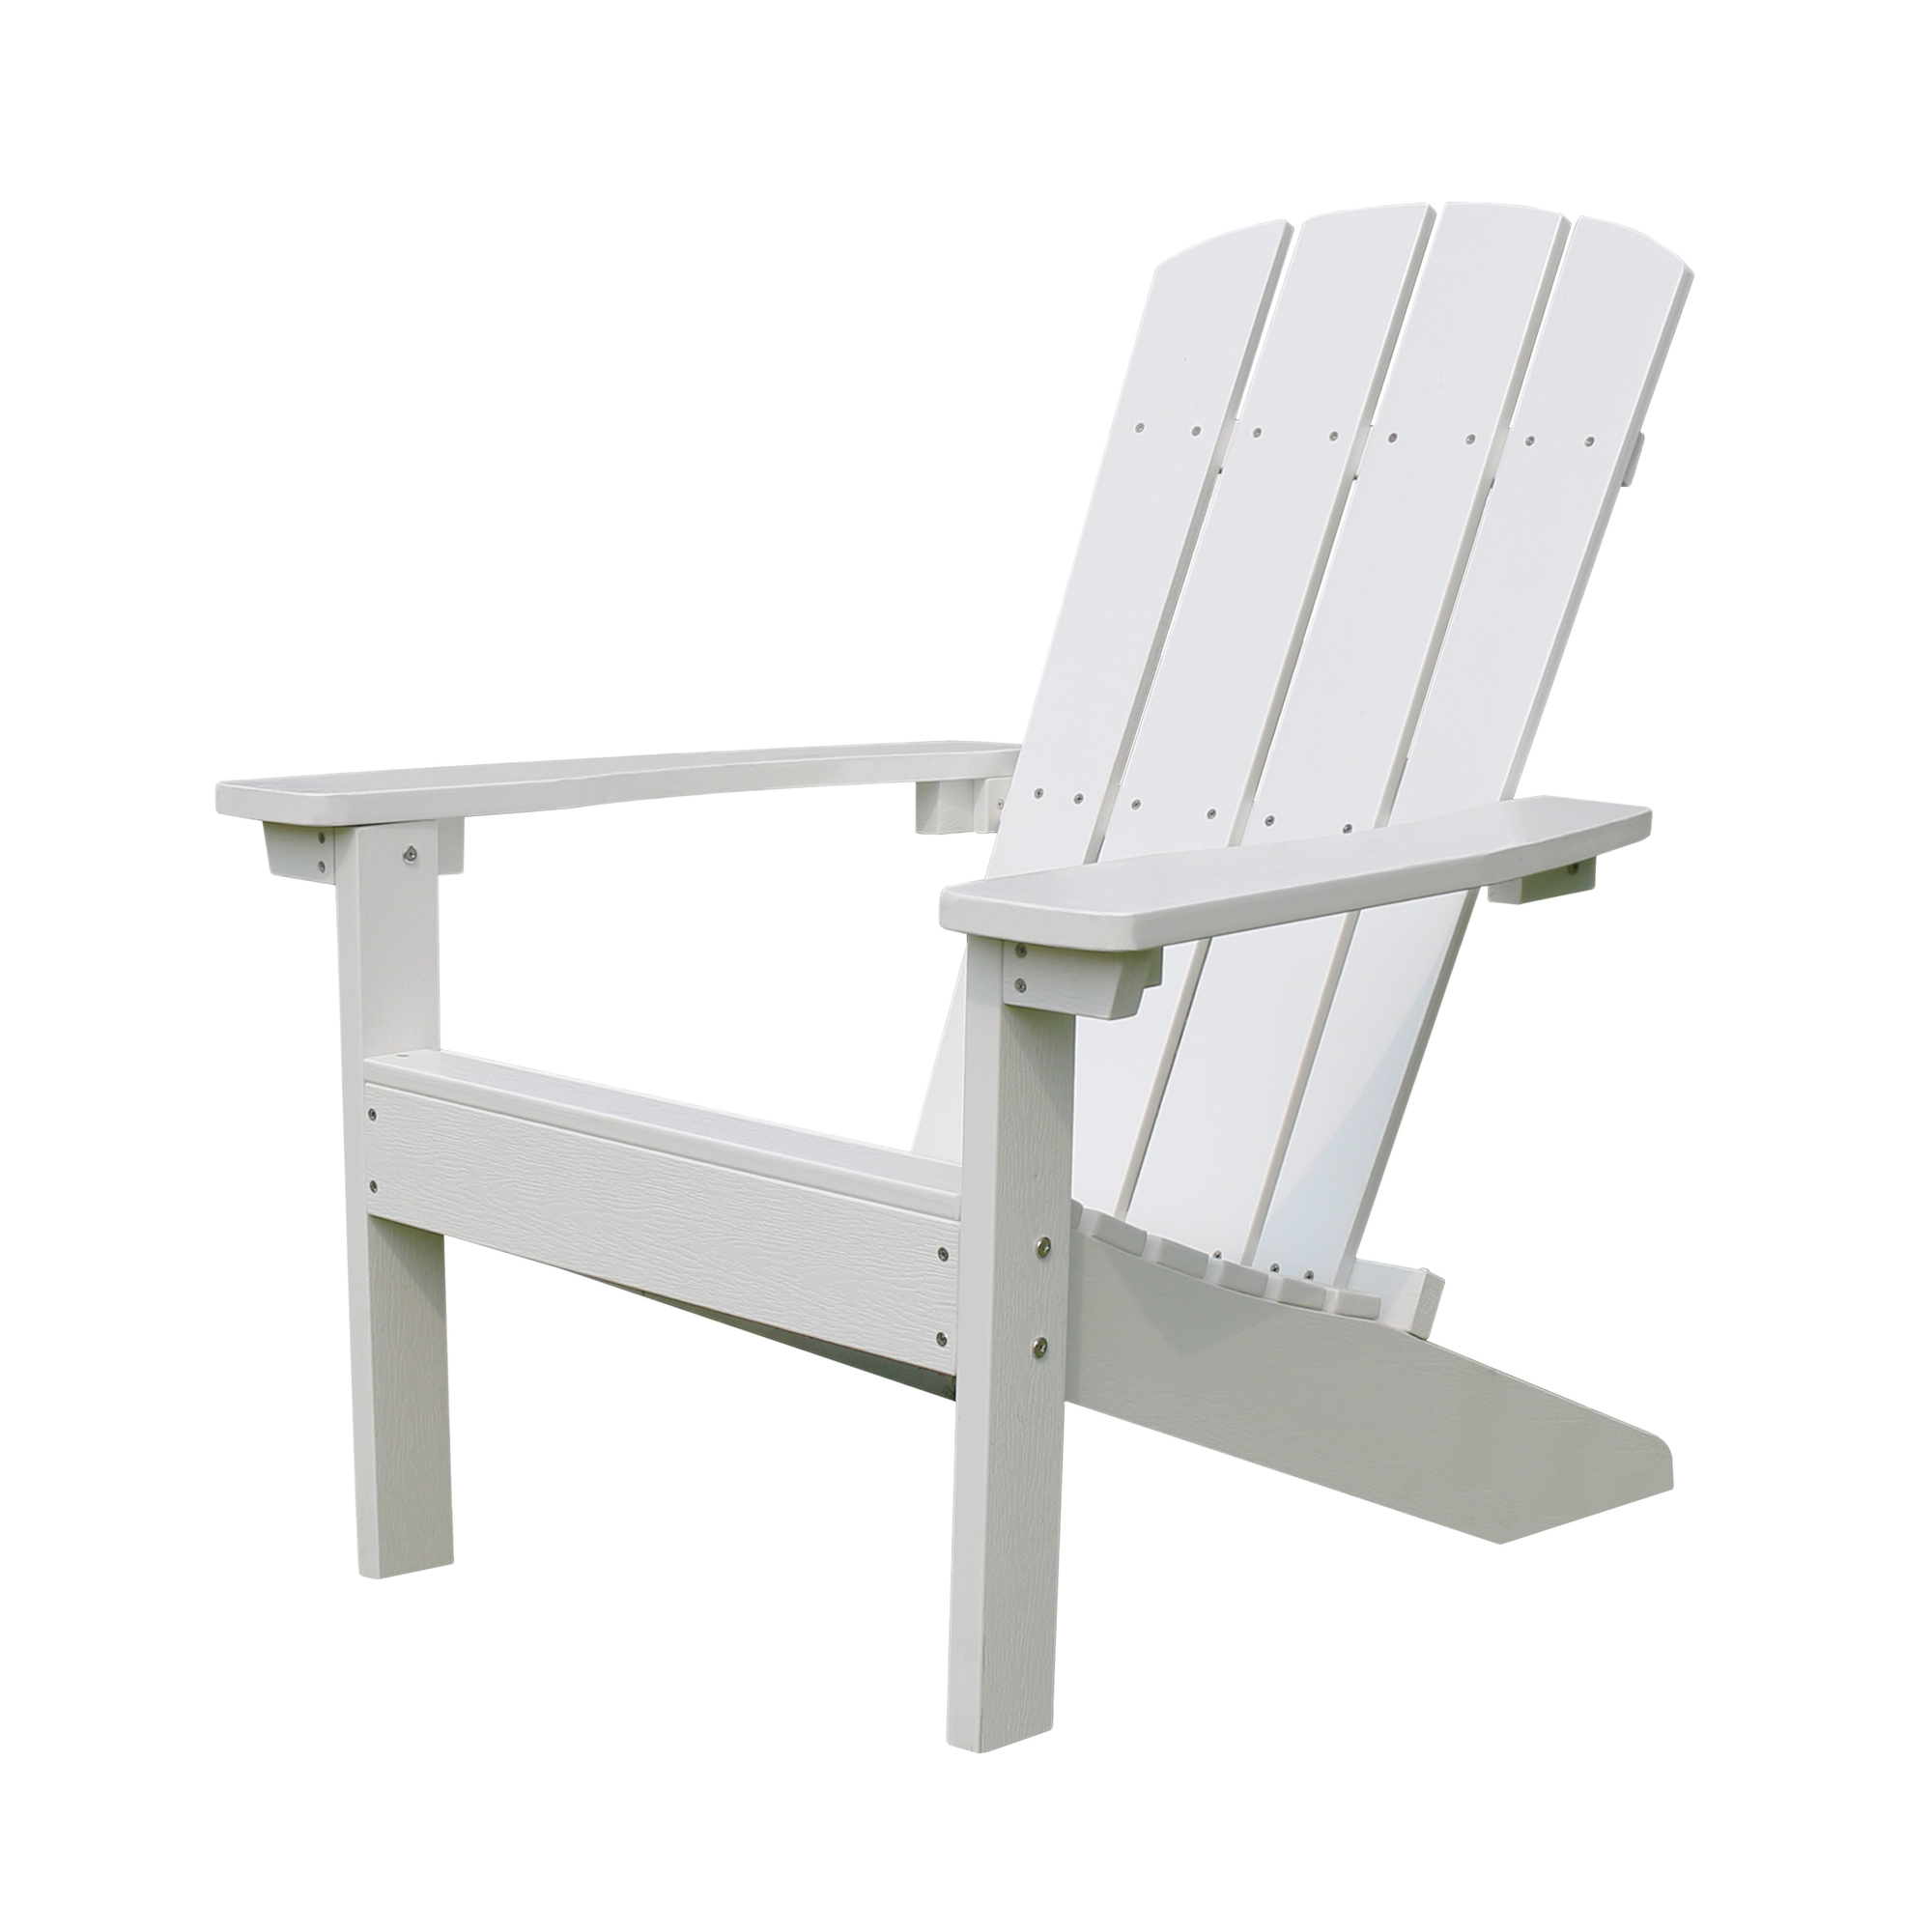 Merry Products, Lakeside Faux Wood Adirondack Chair, White, Primary Color White, Included (qty.) 1, Model ADC0511120110